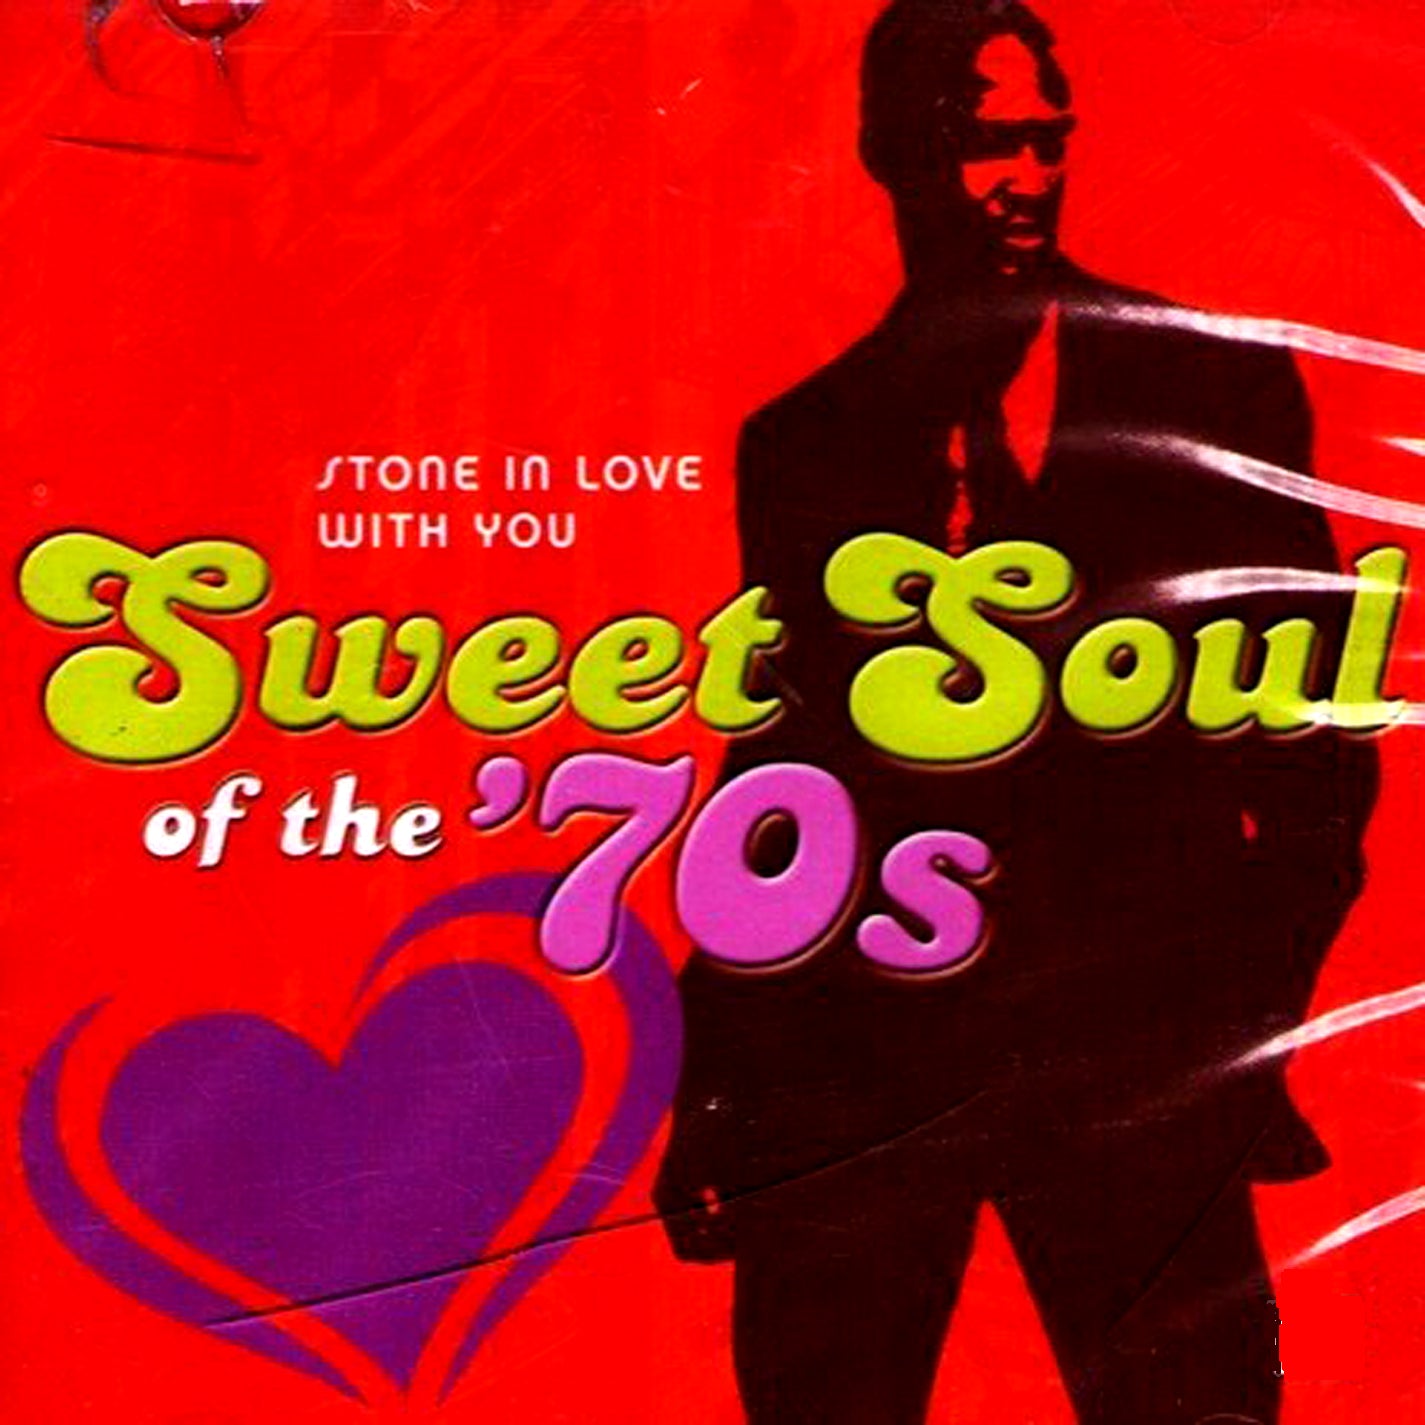 SWEET SOUL OF THE 70'S - STONE IN LOVE WITH YOU - VARIOUS ARTISTS (CD LP) c1970